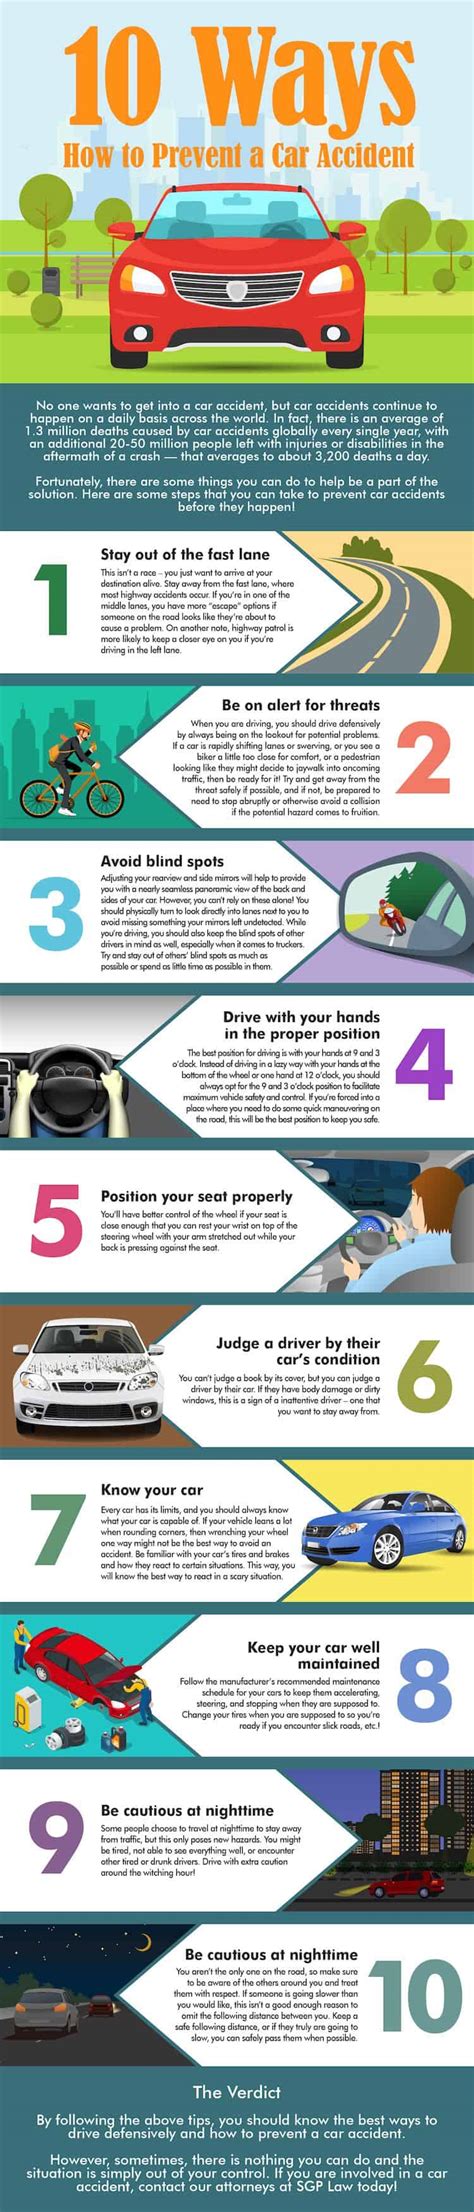 how to avoid car accidents